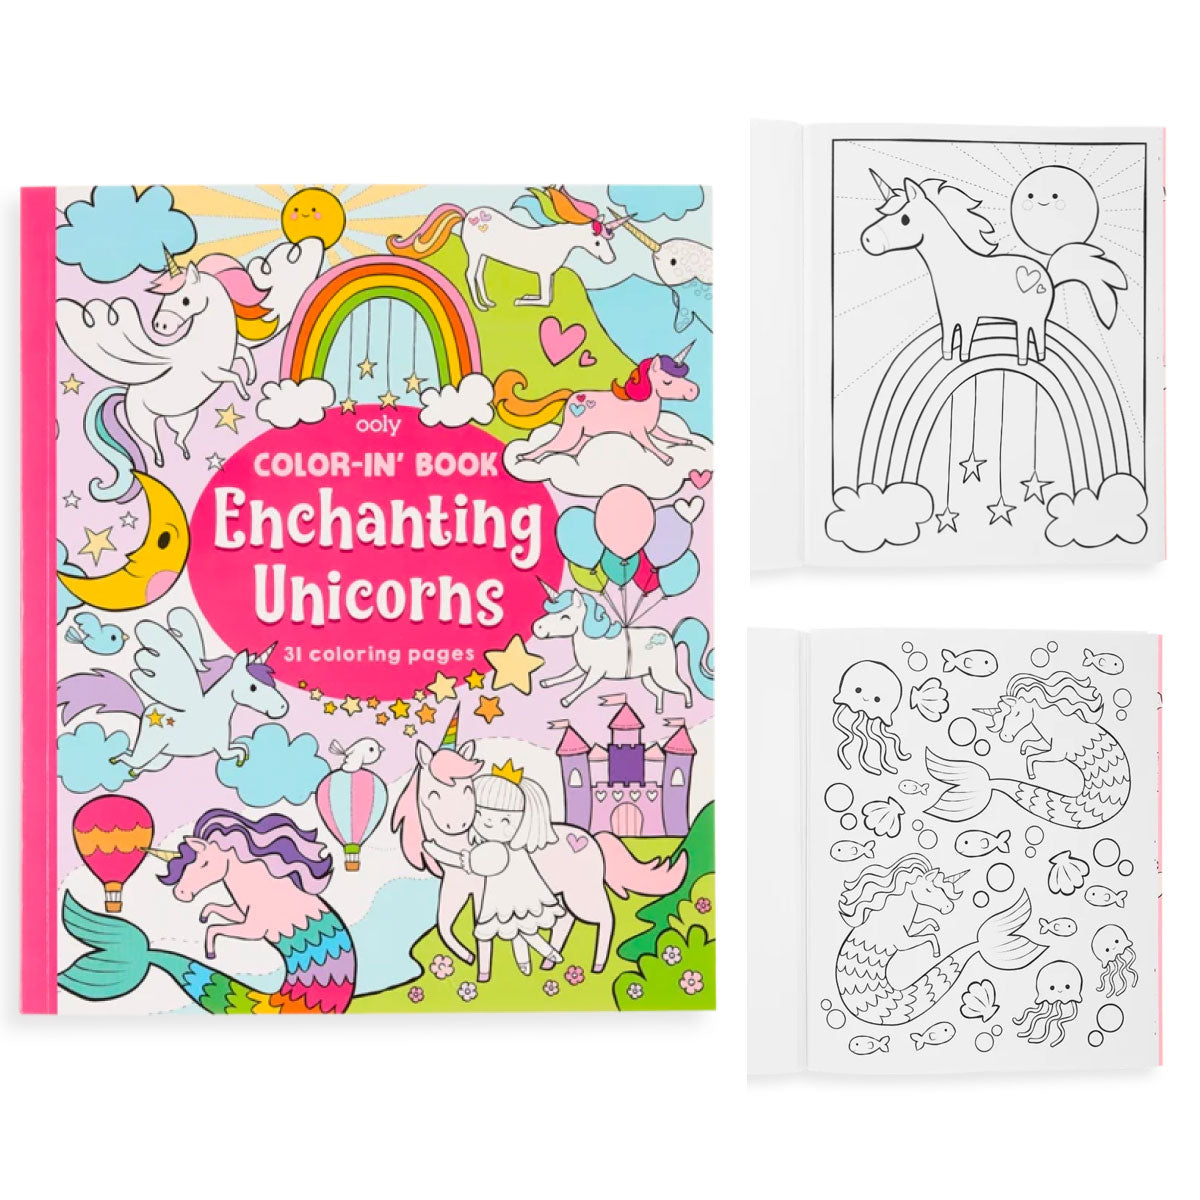 Enchanting Unicorns Color-In' Book from Ooly